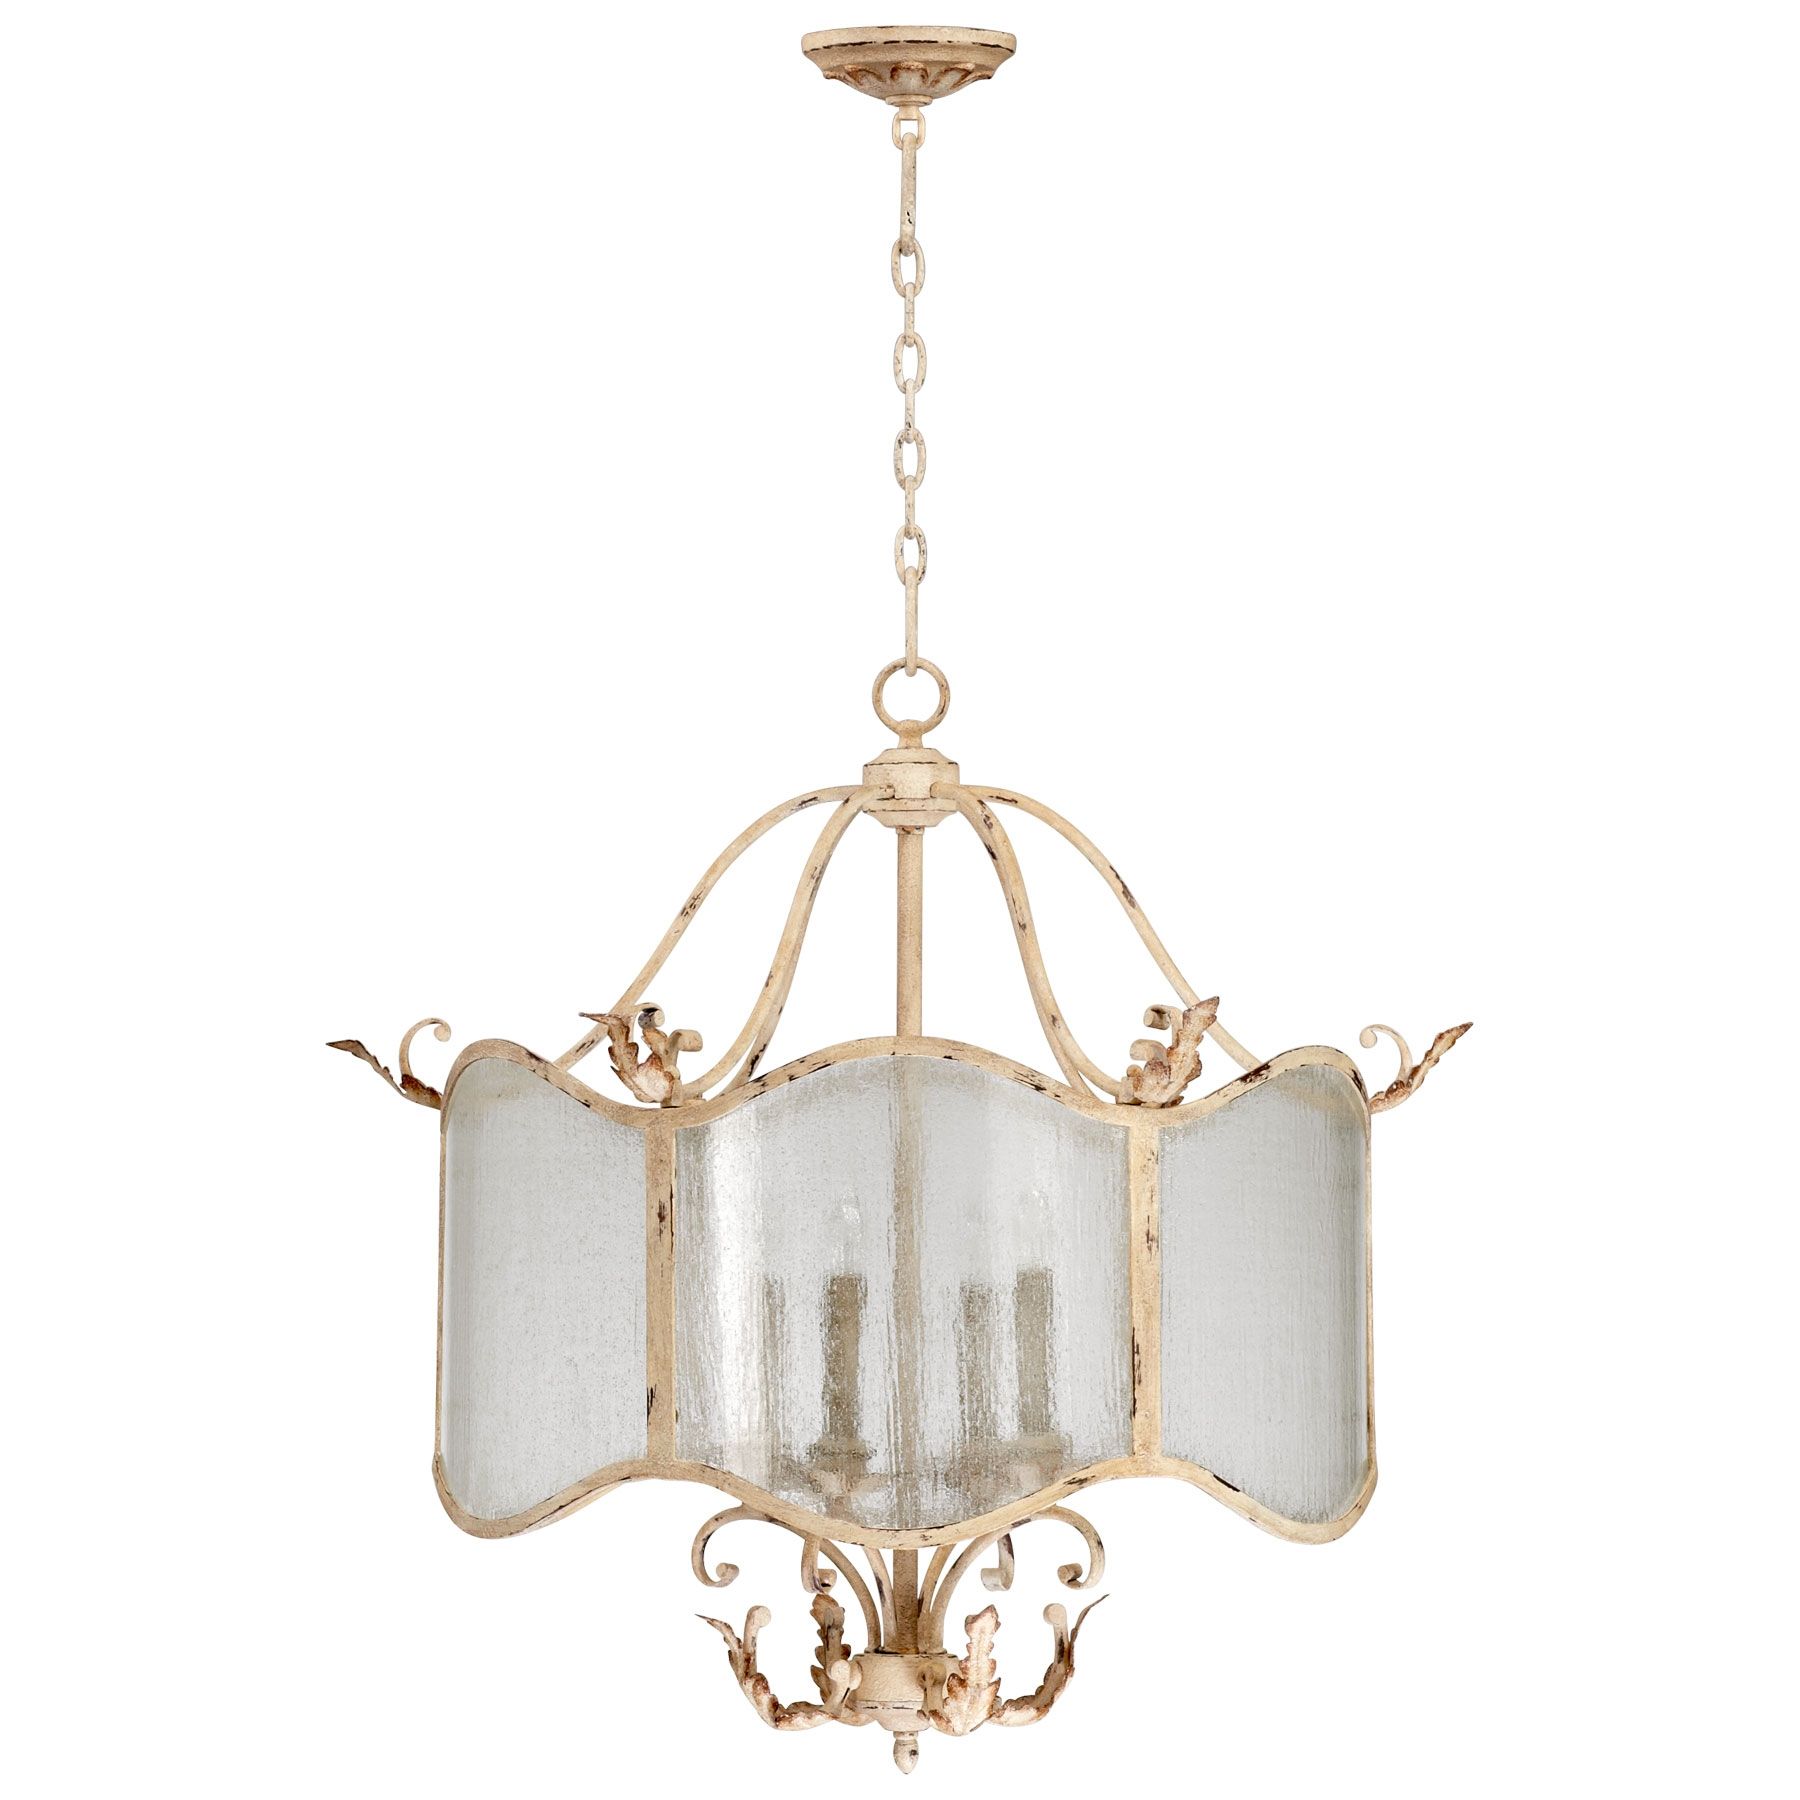 Vintage French Country Chandelier With Glass Lamp Shades And Iron Intended For French Glass Chandelier (Photo 10 of 12)